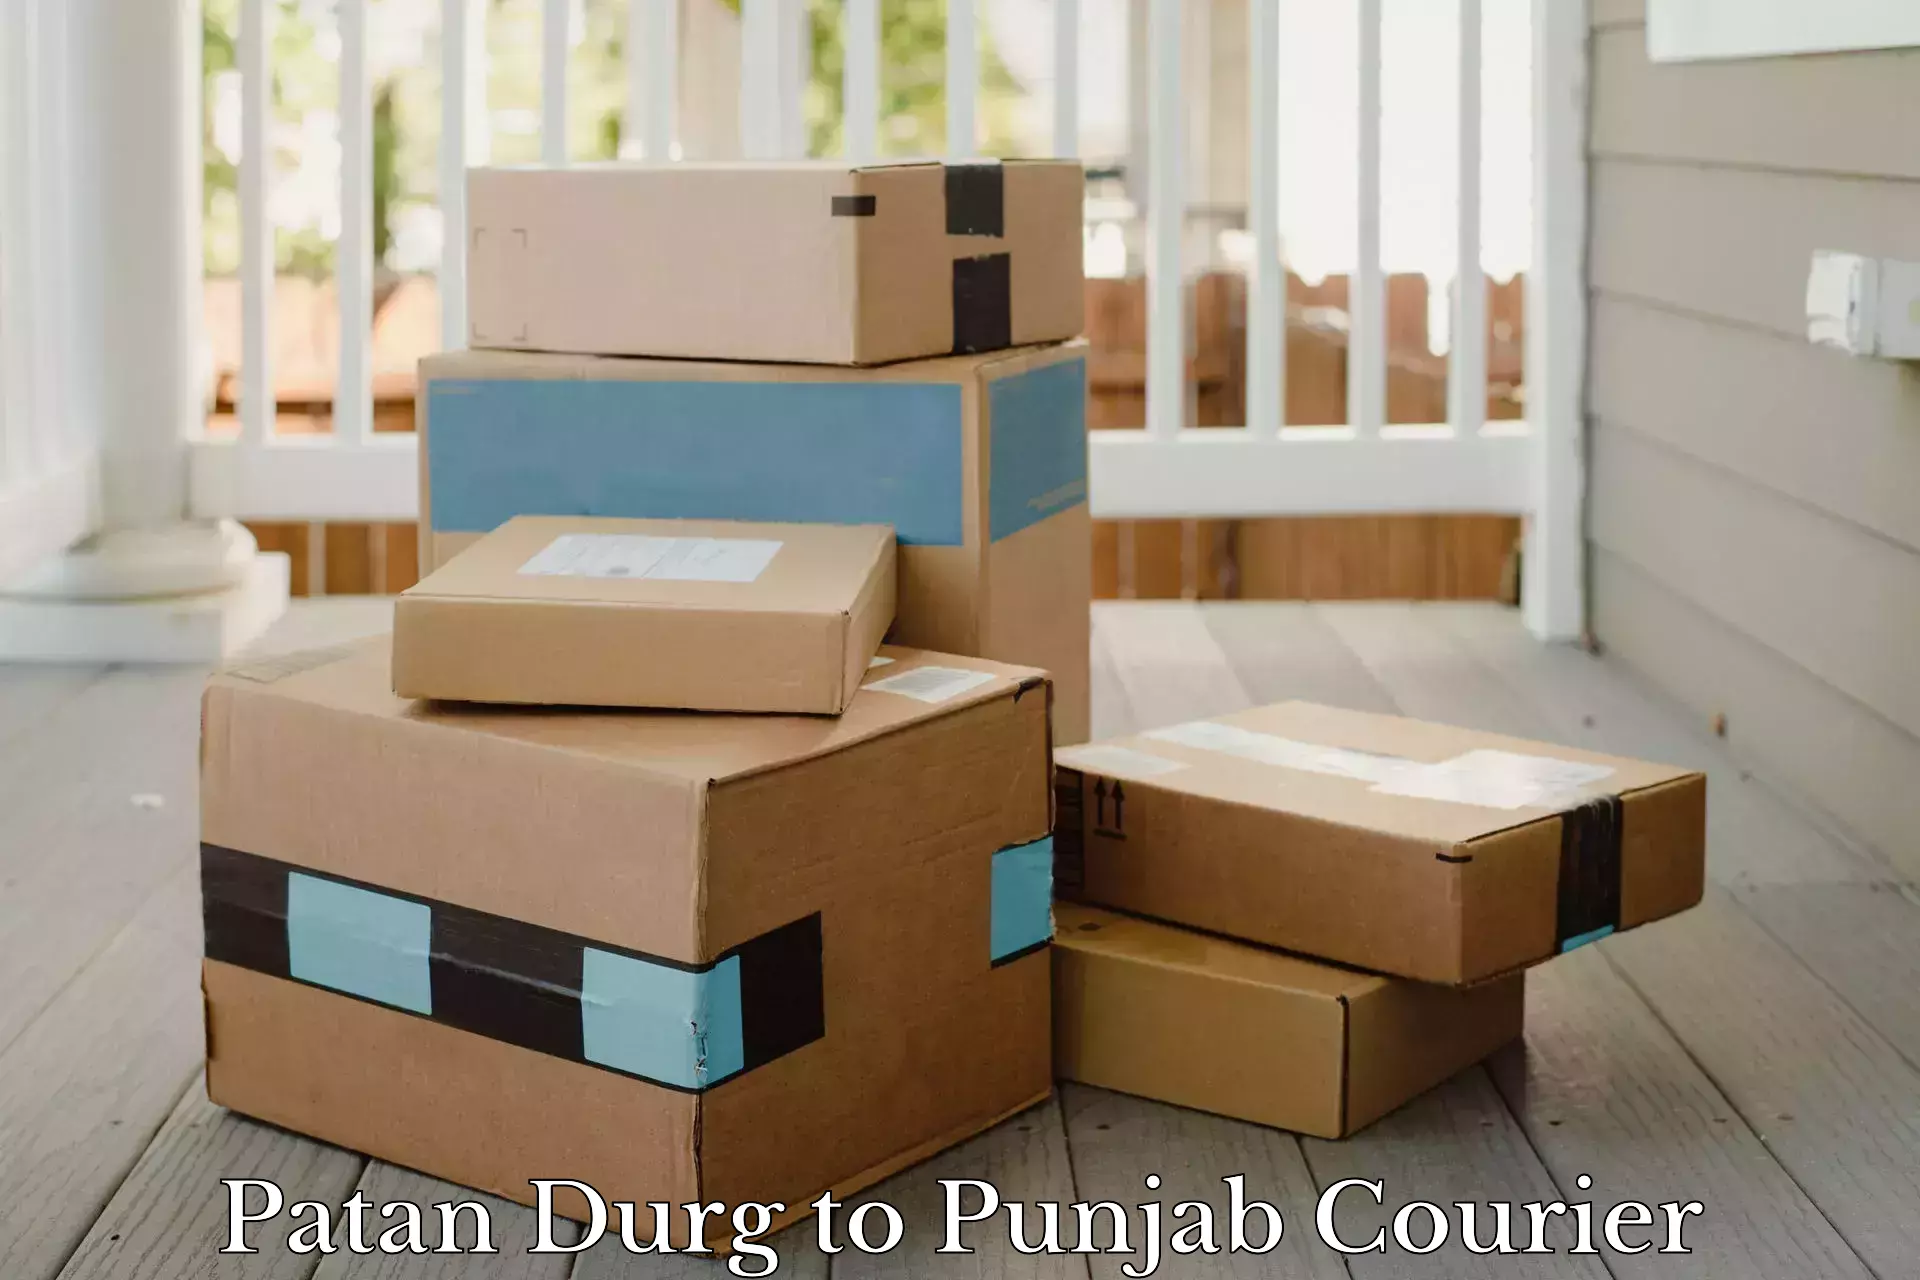 Courier service comparison in Patan Durg to Thapar Institute of Engineering and Technology Patiala